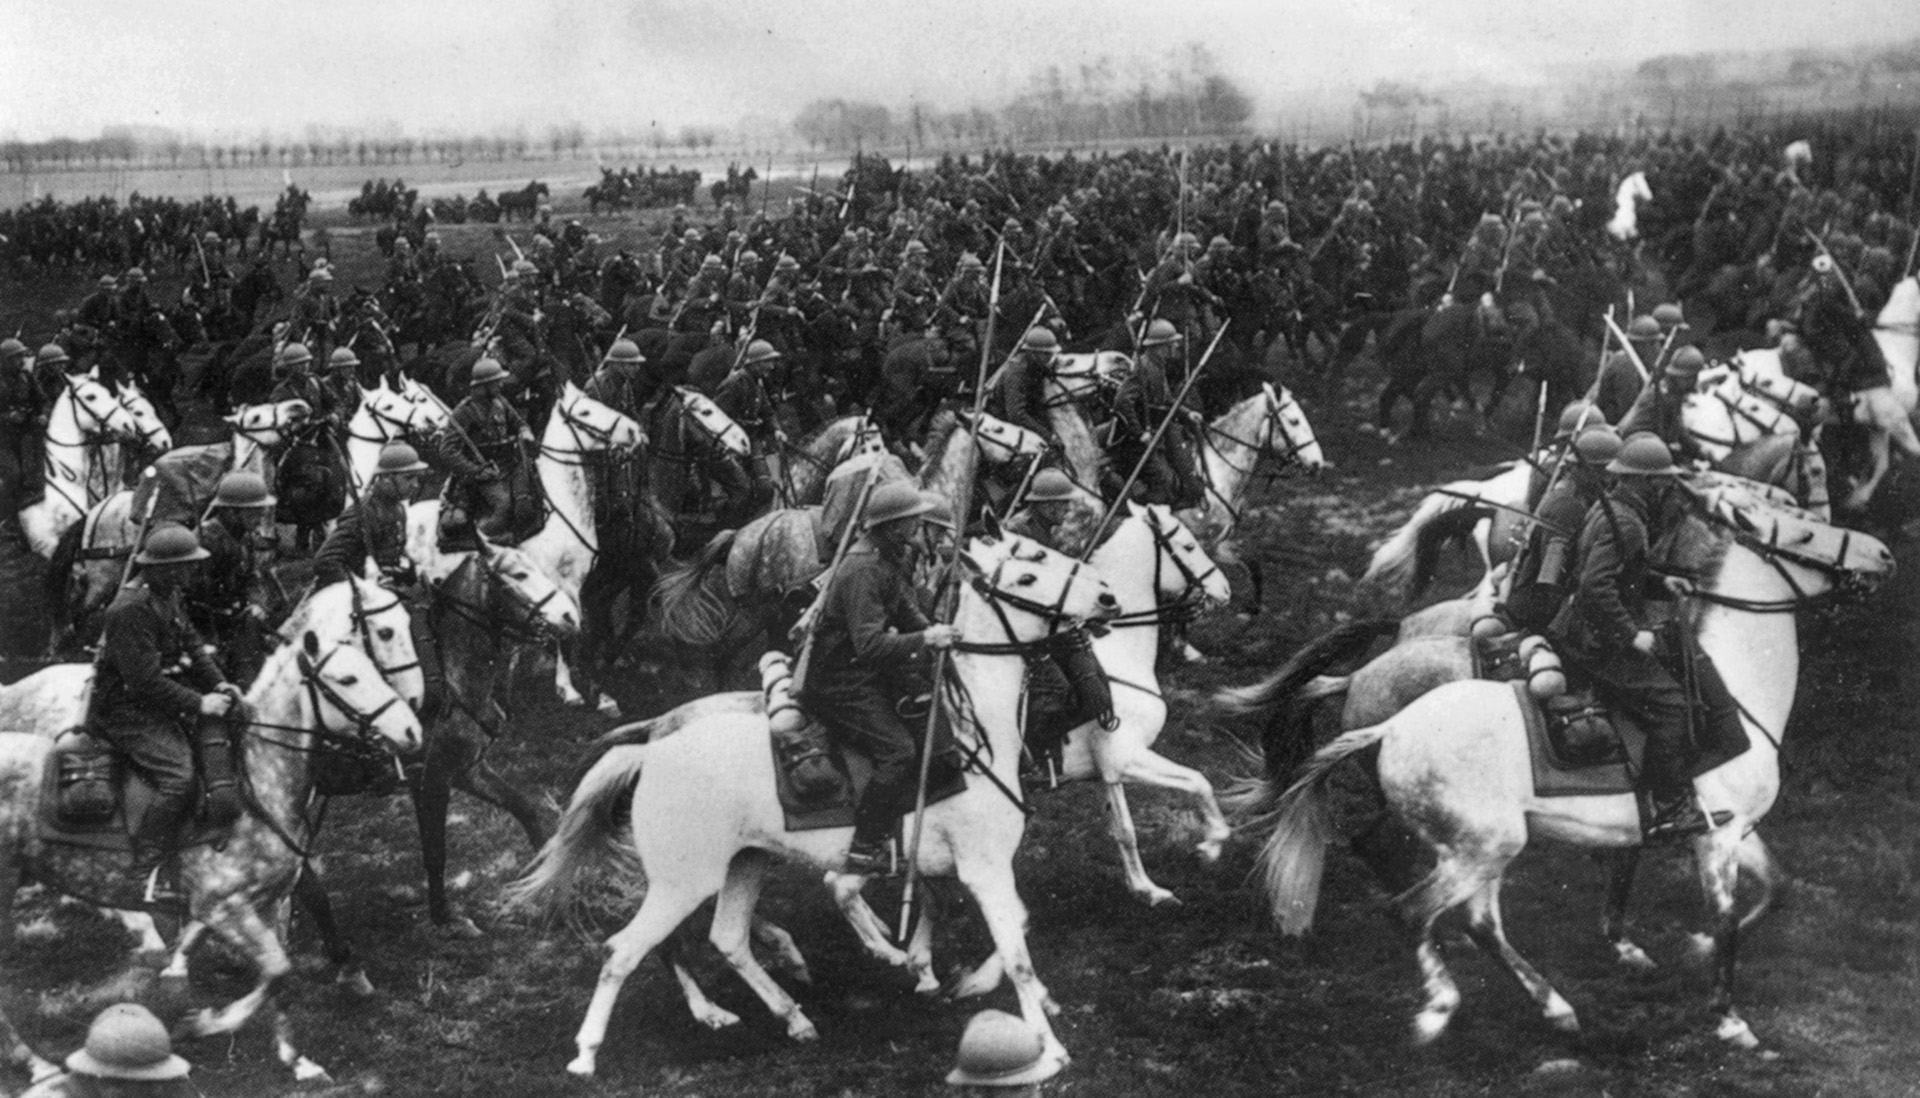 Polish cavalry are shown on maneuvers in the 1930s. While Polish military strategists may have overestimated the value of their cavalry, they duly recognized its growing obsolescence in modern warfare and sought to adjust its tactics and armaments accordingly.